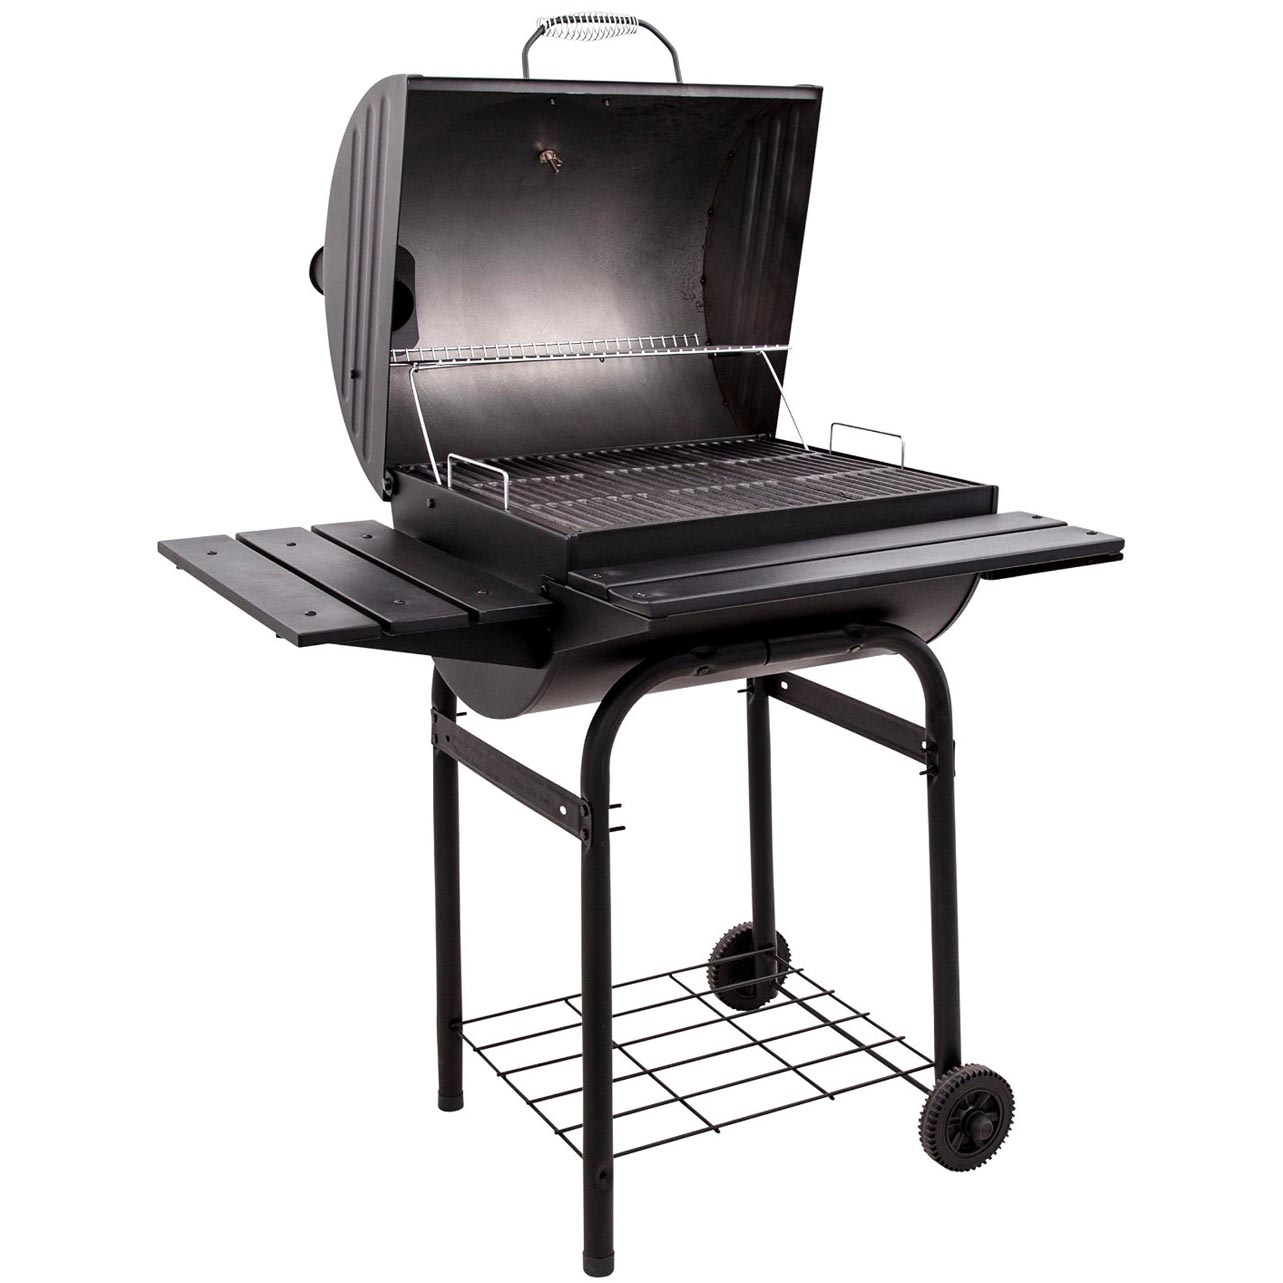 American Gourmet by Char-Broil 625 sq in Charcoal Barrel Outdoor Grill - image 4 of 6